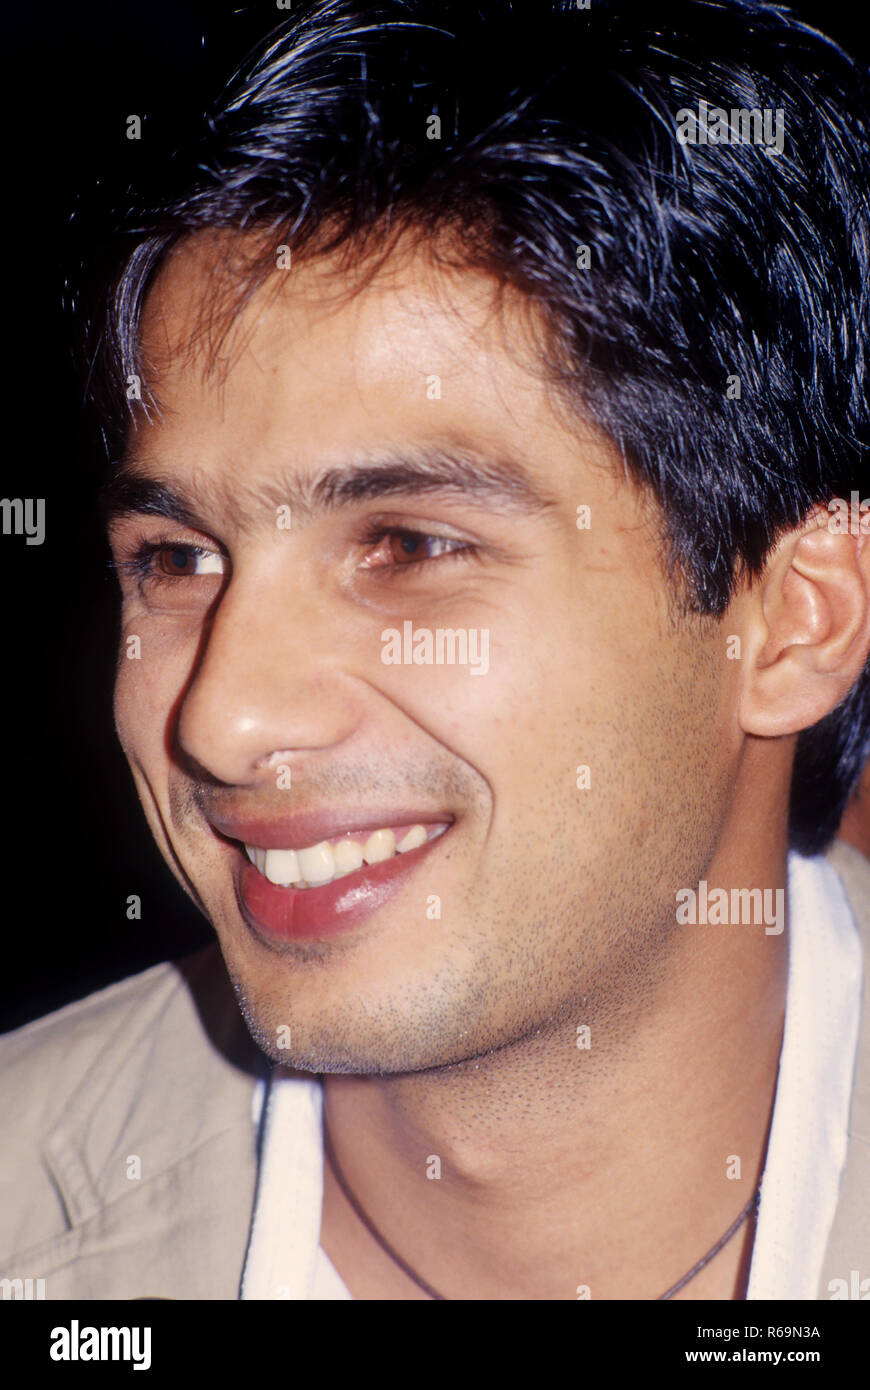 South Asian Indian Bollywood Film actor Shahid Kapoor NO Model released Stock Photo